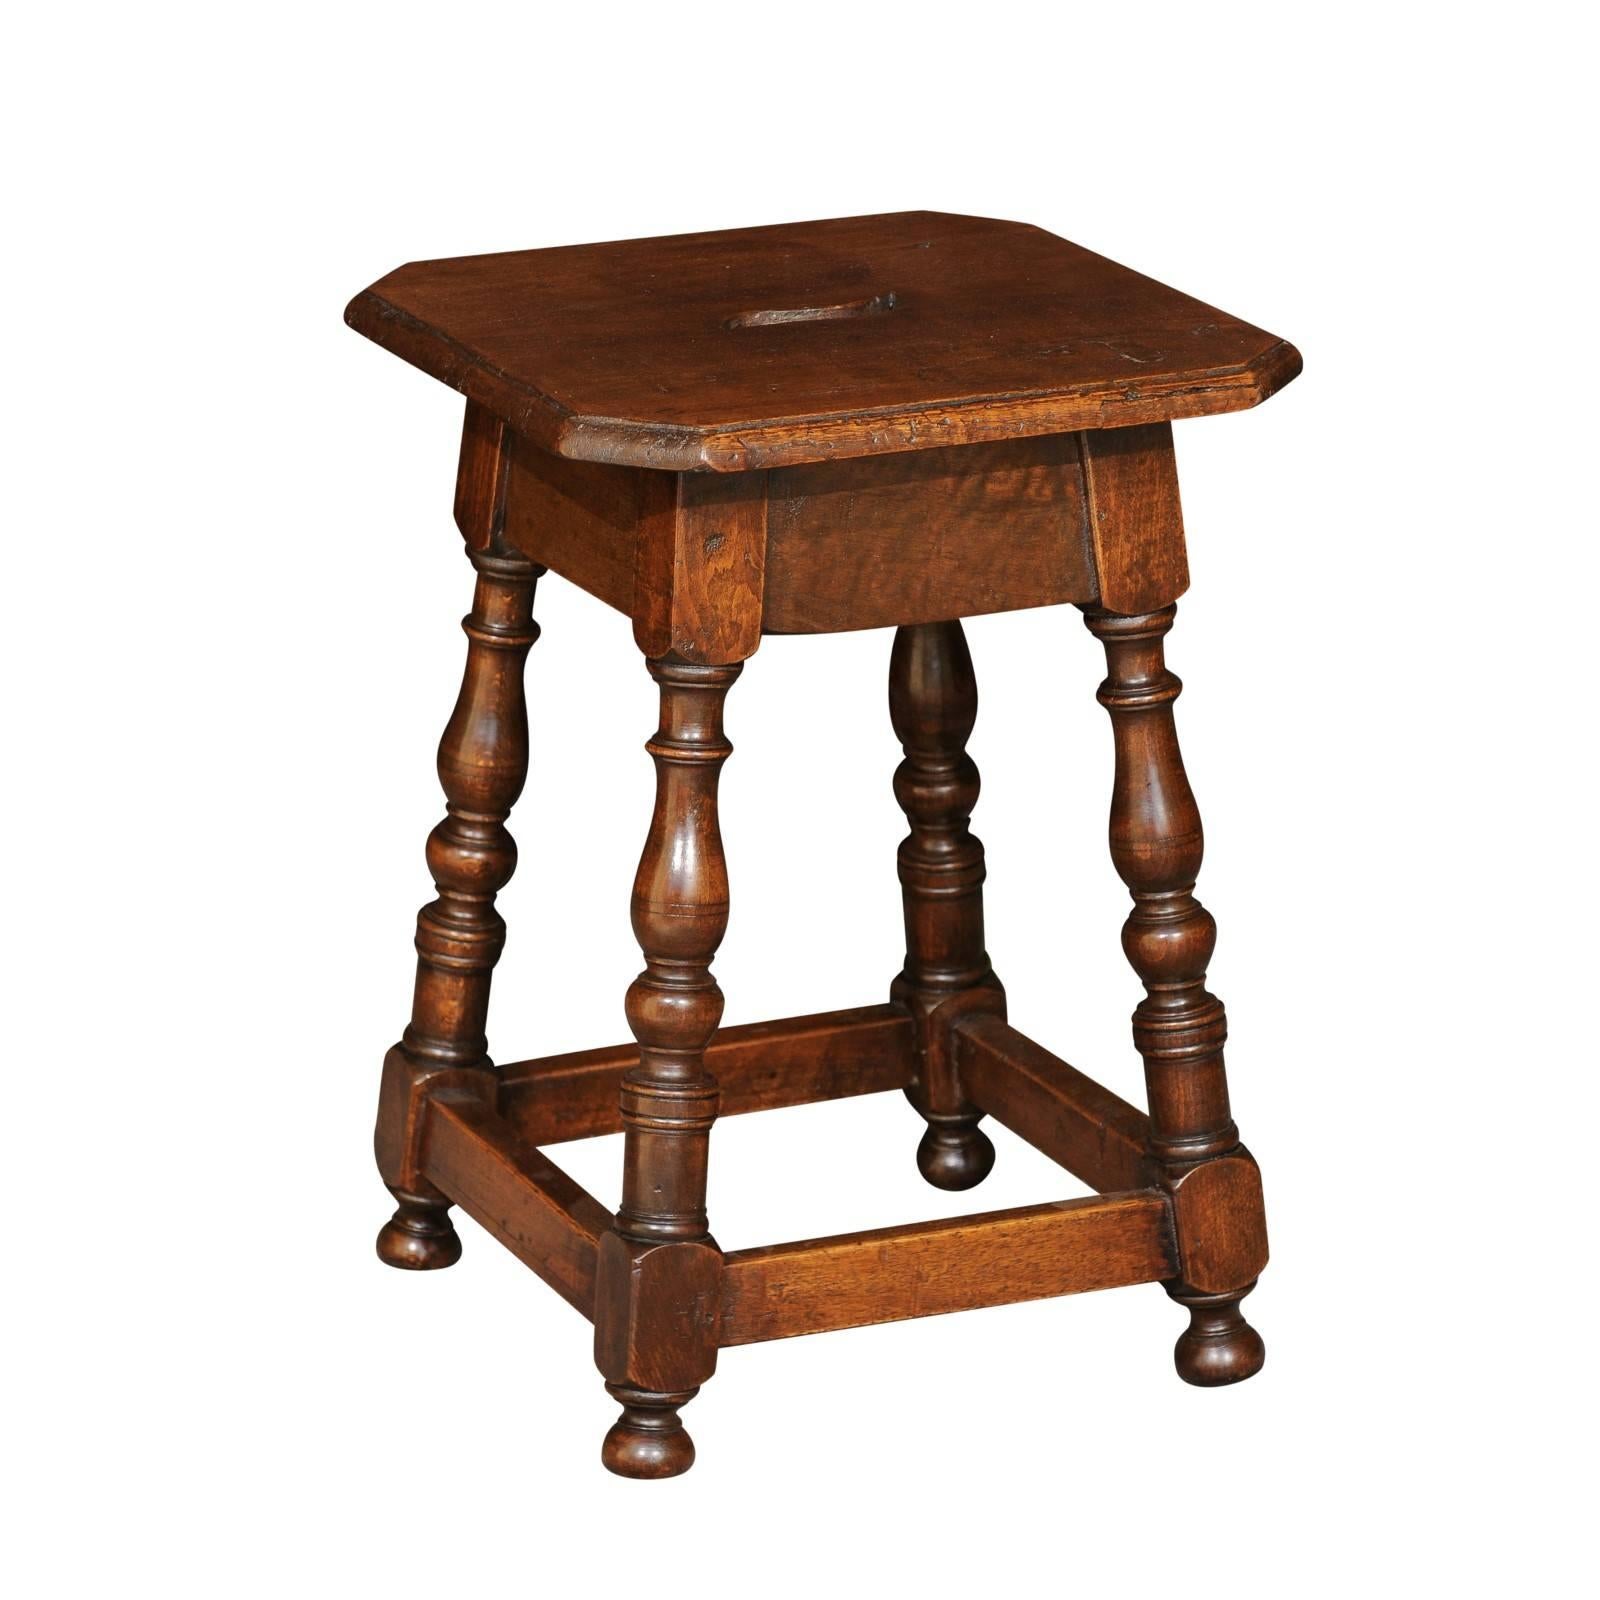 Italian Walnut Stool with Splayed Legs and Pierced Handle from the 1820s